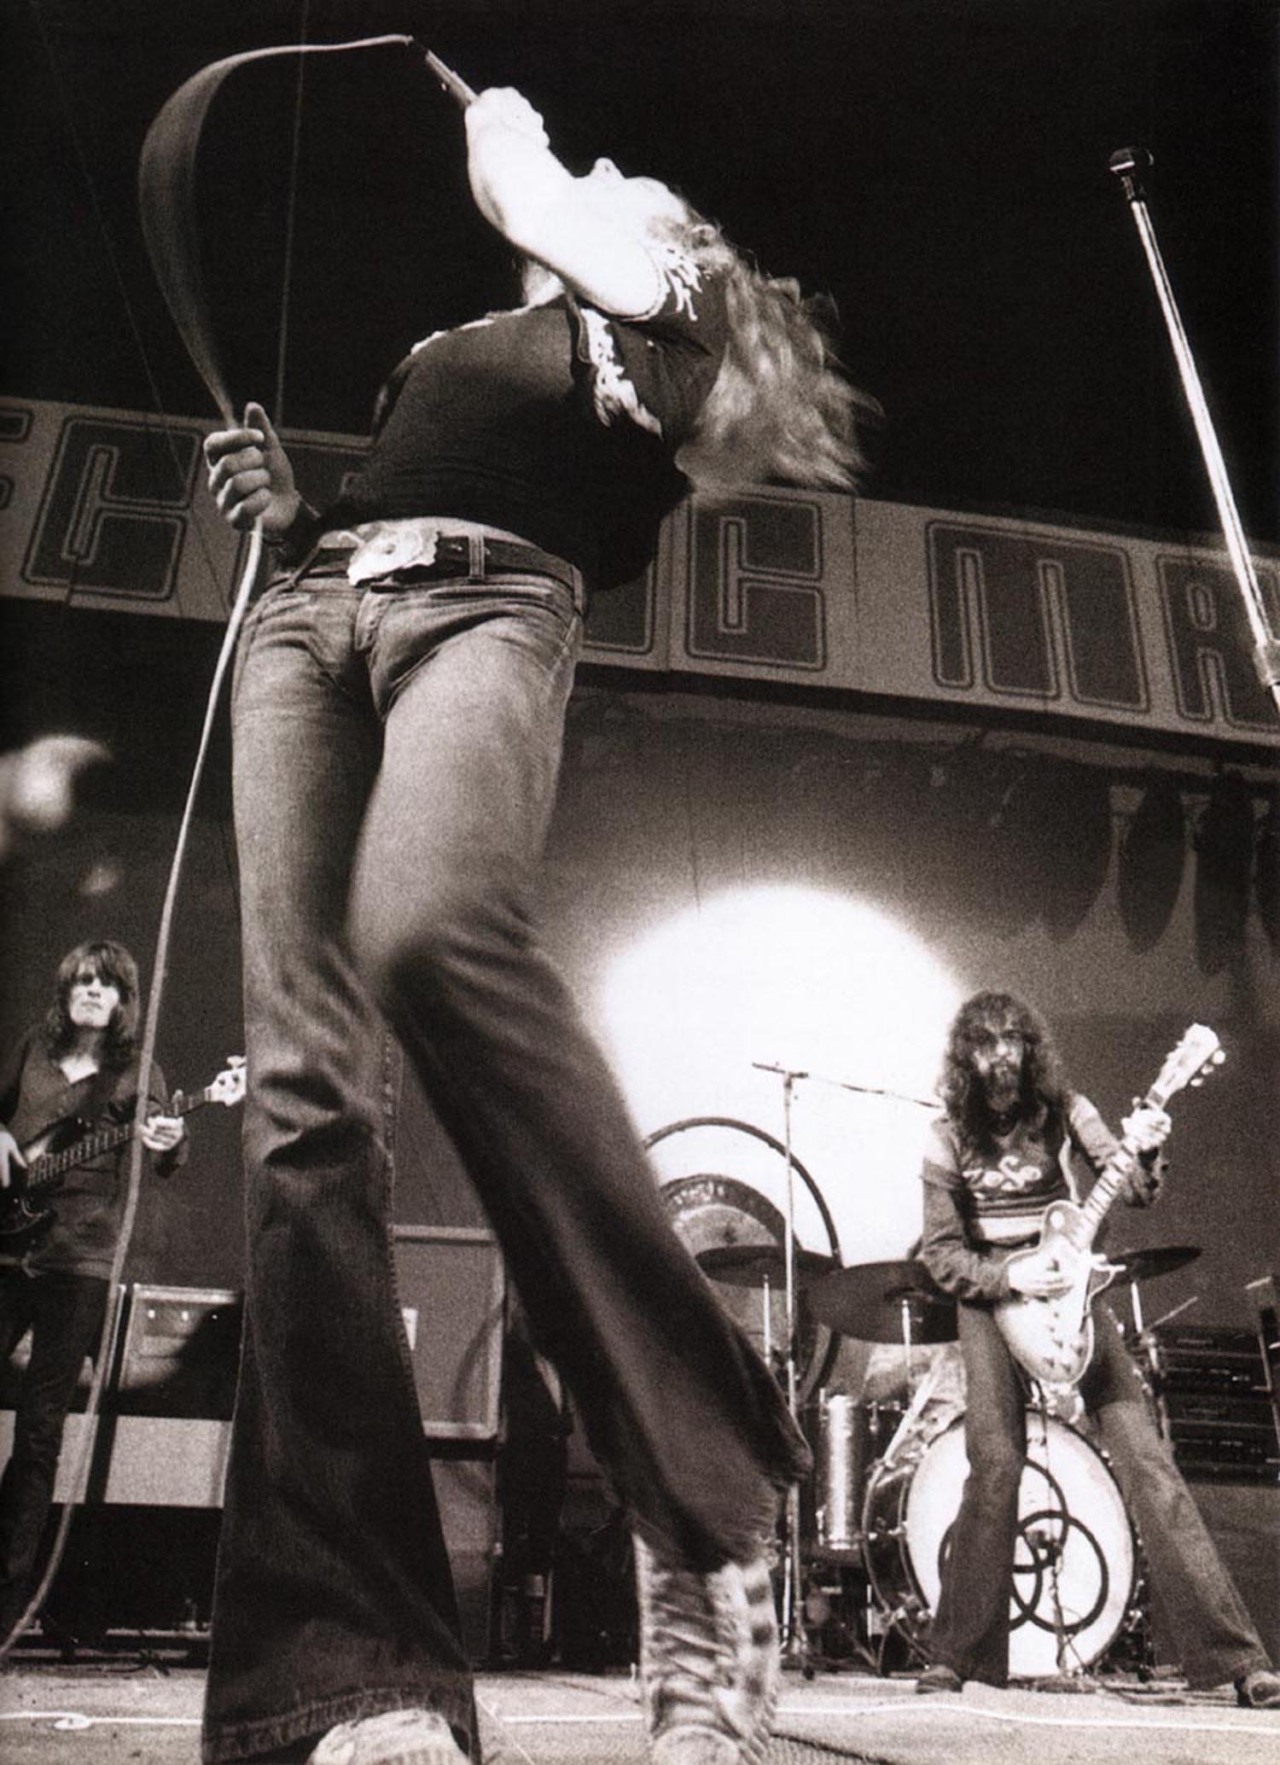 1971: Classic Rock's Classic Year — Led Zeppelin at the Electric